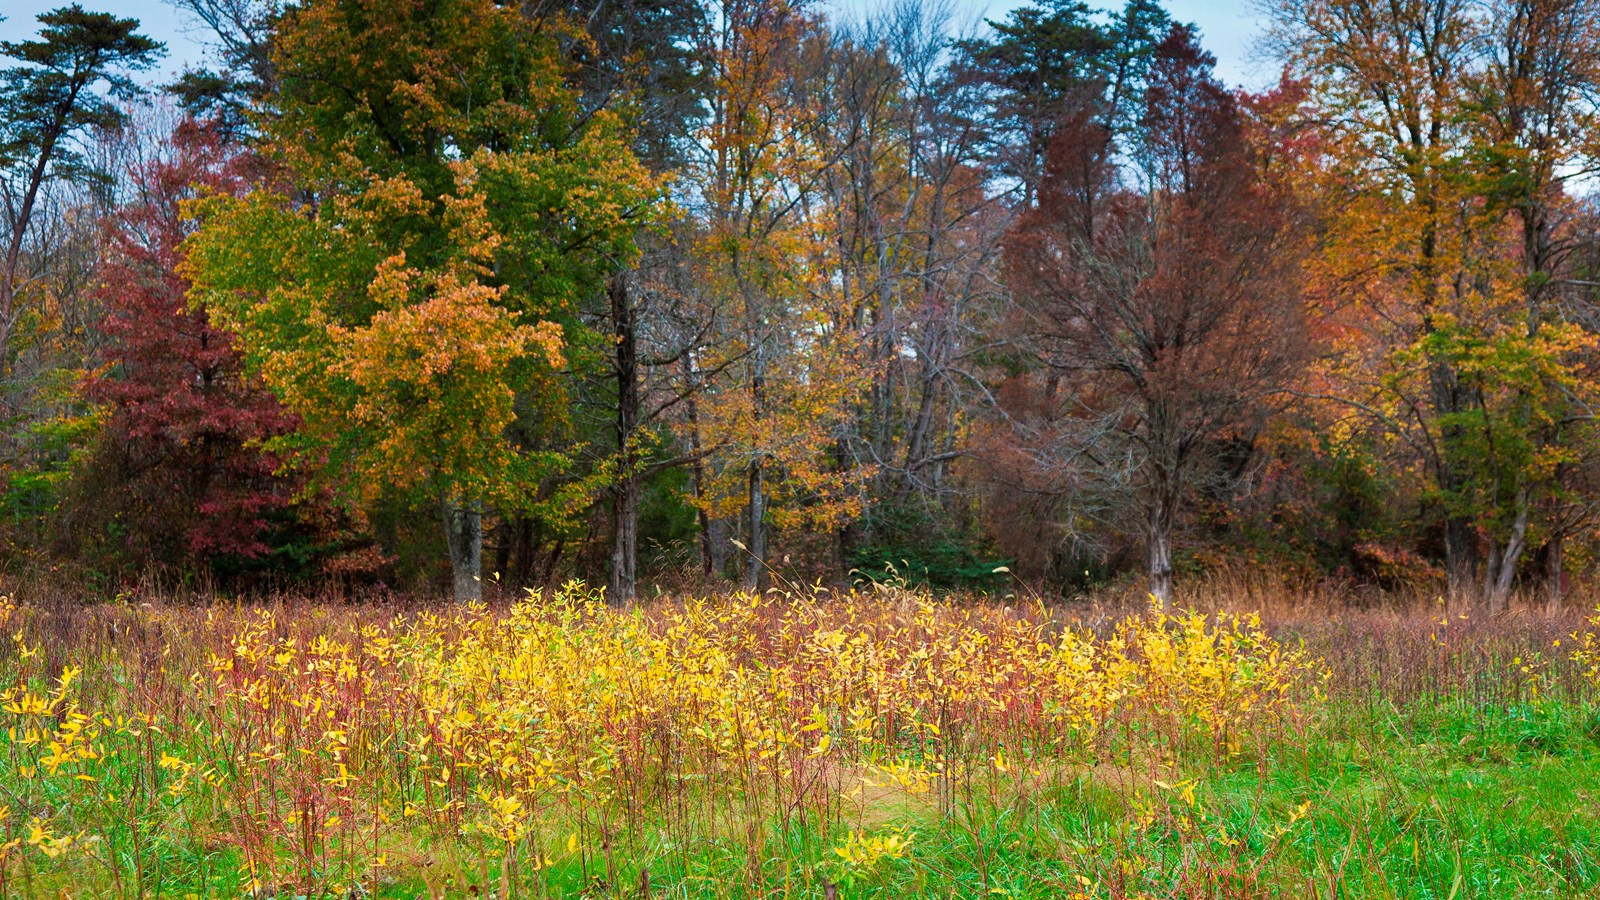 A field with high grasses in fall colors.